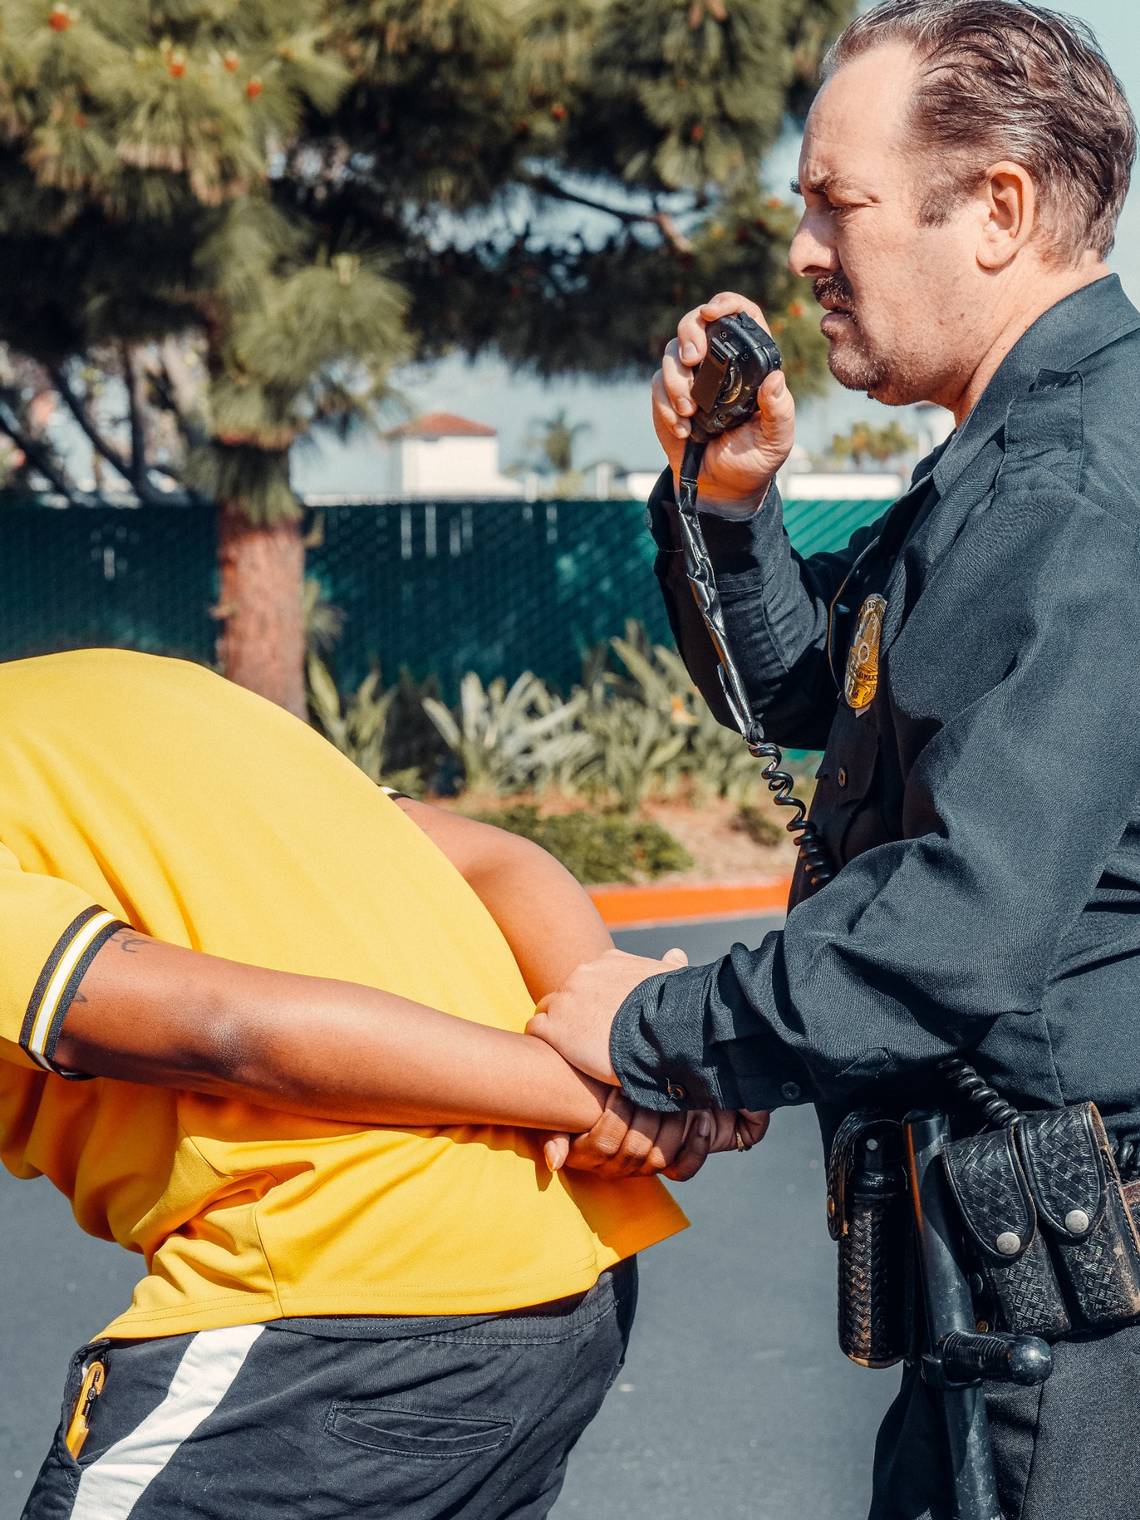 Is it illegal in Texas to take a photo or video of a police officer making an arrest?